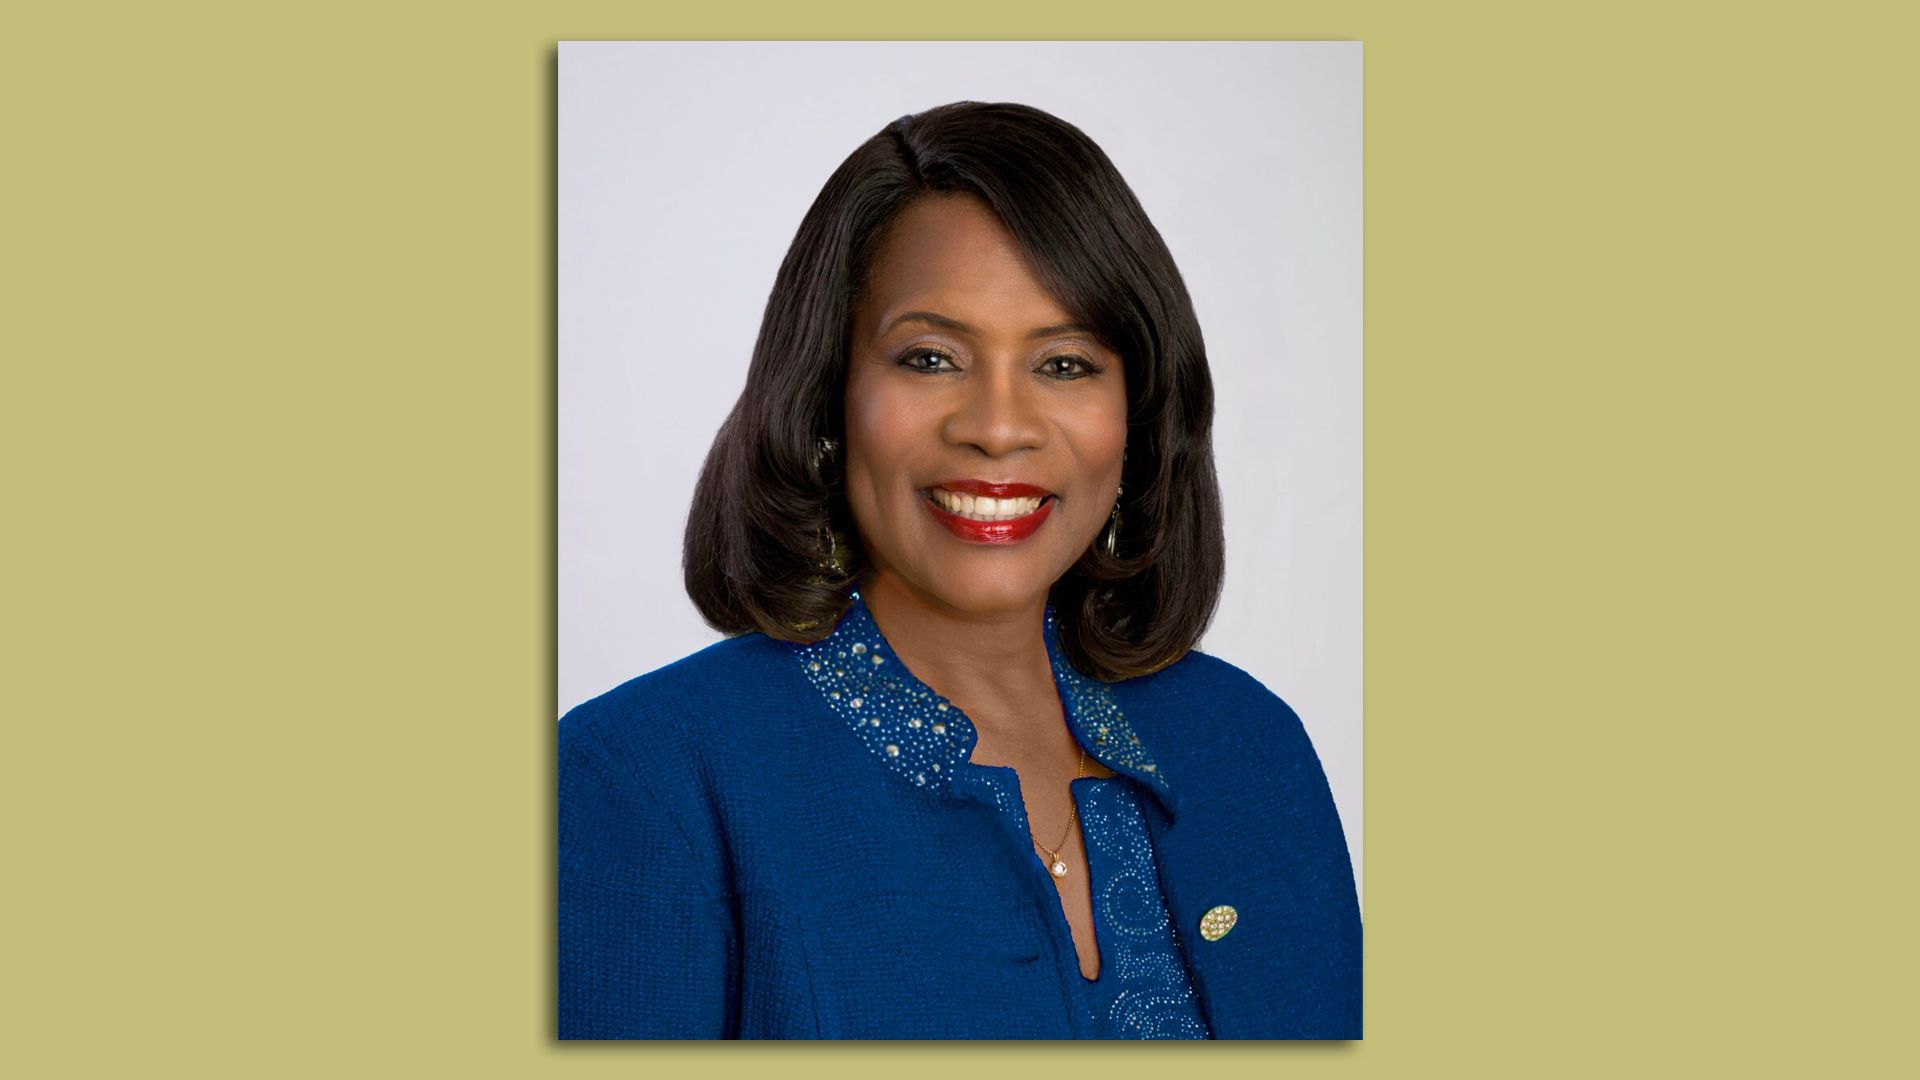 Tennessee State University President Glenda Glover smiling in a blue suit.